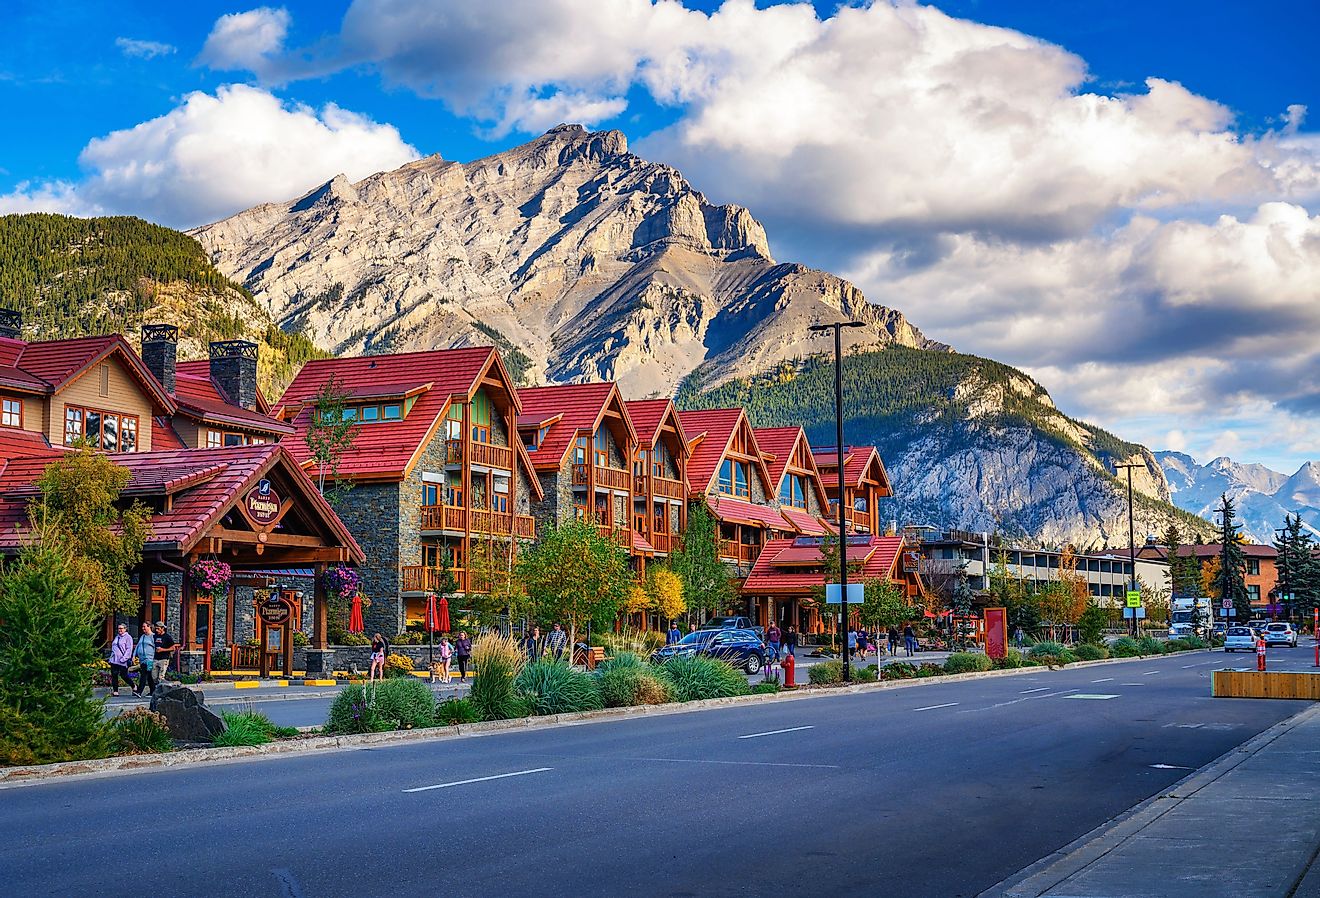 Scenic street view of Banff Avenue with cars and tourists, Banff, Alberta. Image credit Nick Fox via Shutterstock